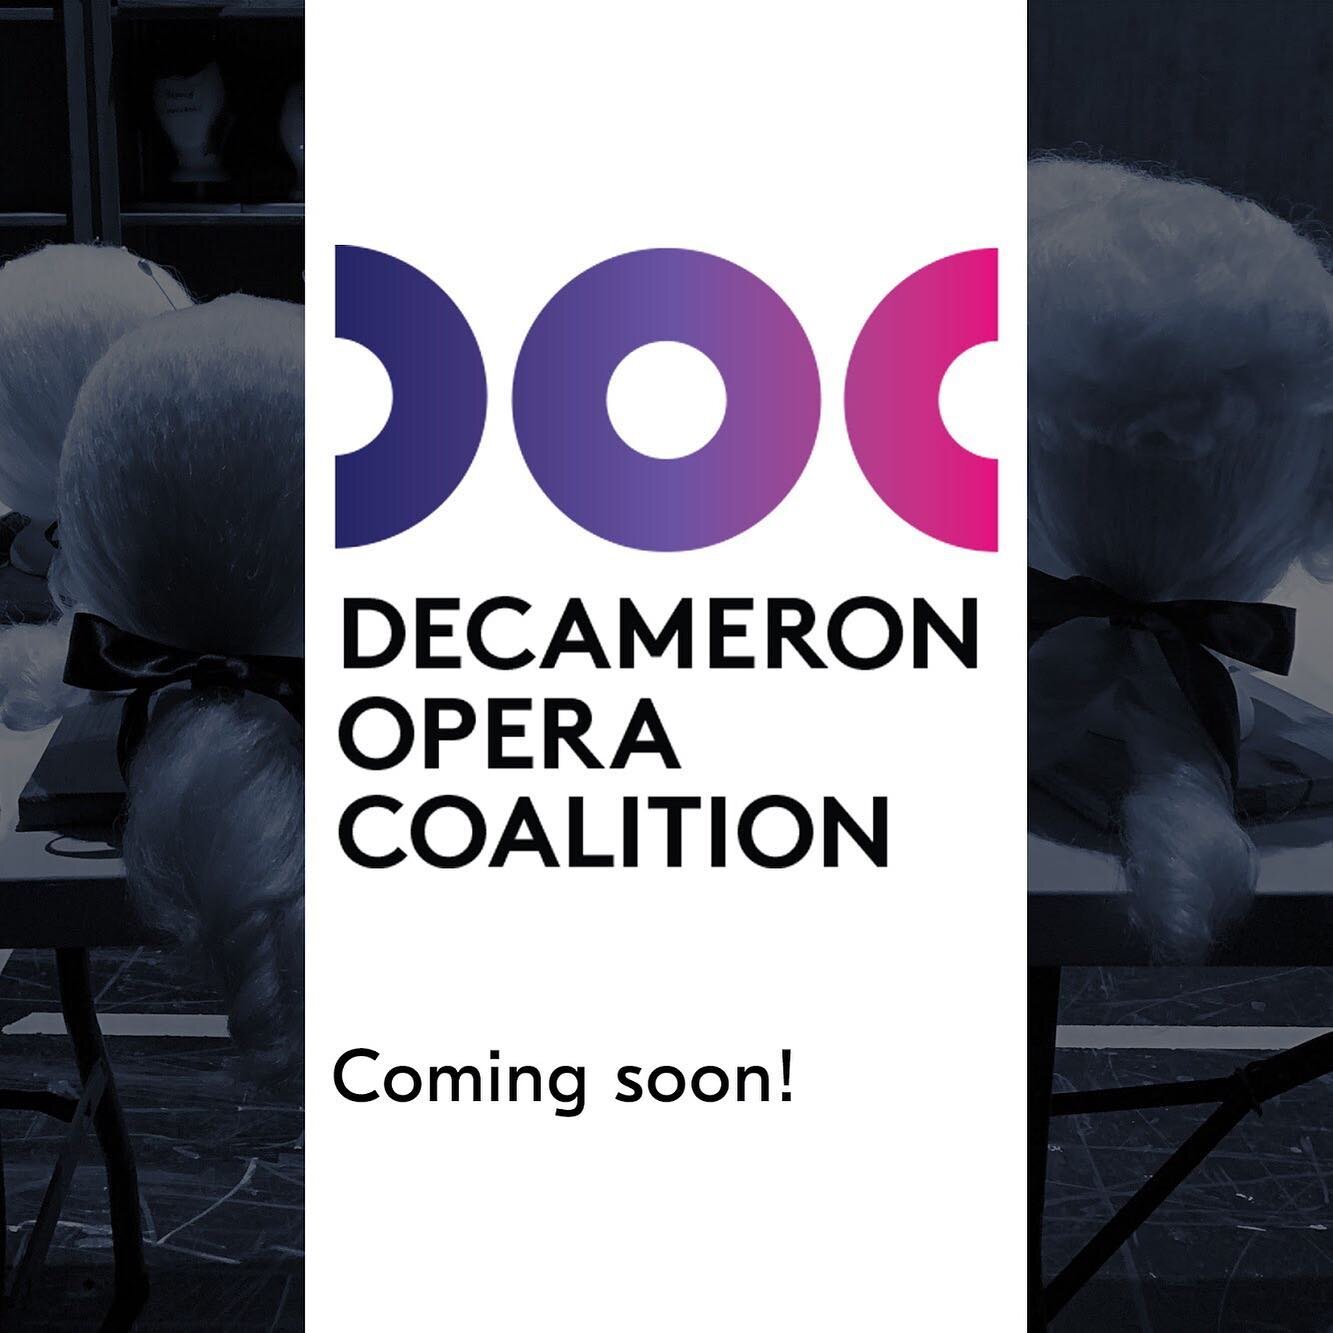 Well, well, what&rsquo;s this? And what does it have to do with Peter and Matt? 
Follow @decameronopera and watch this space to learn about a new nationwide opera collaboration and the world premiere it has commissioned!

#hilliardandboresi #newopera